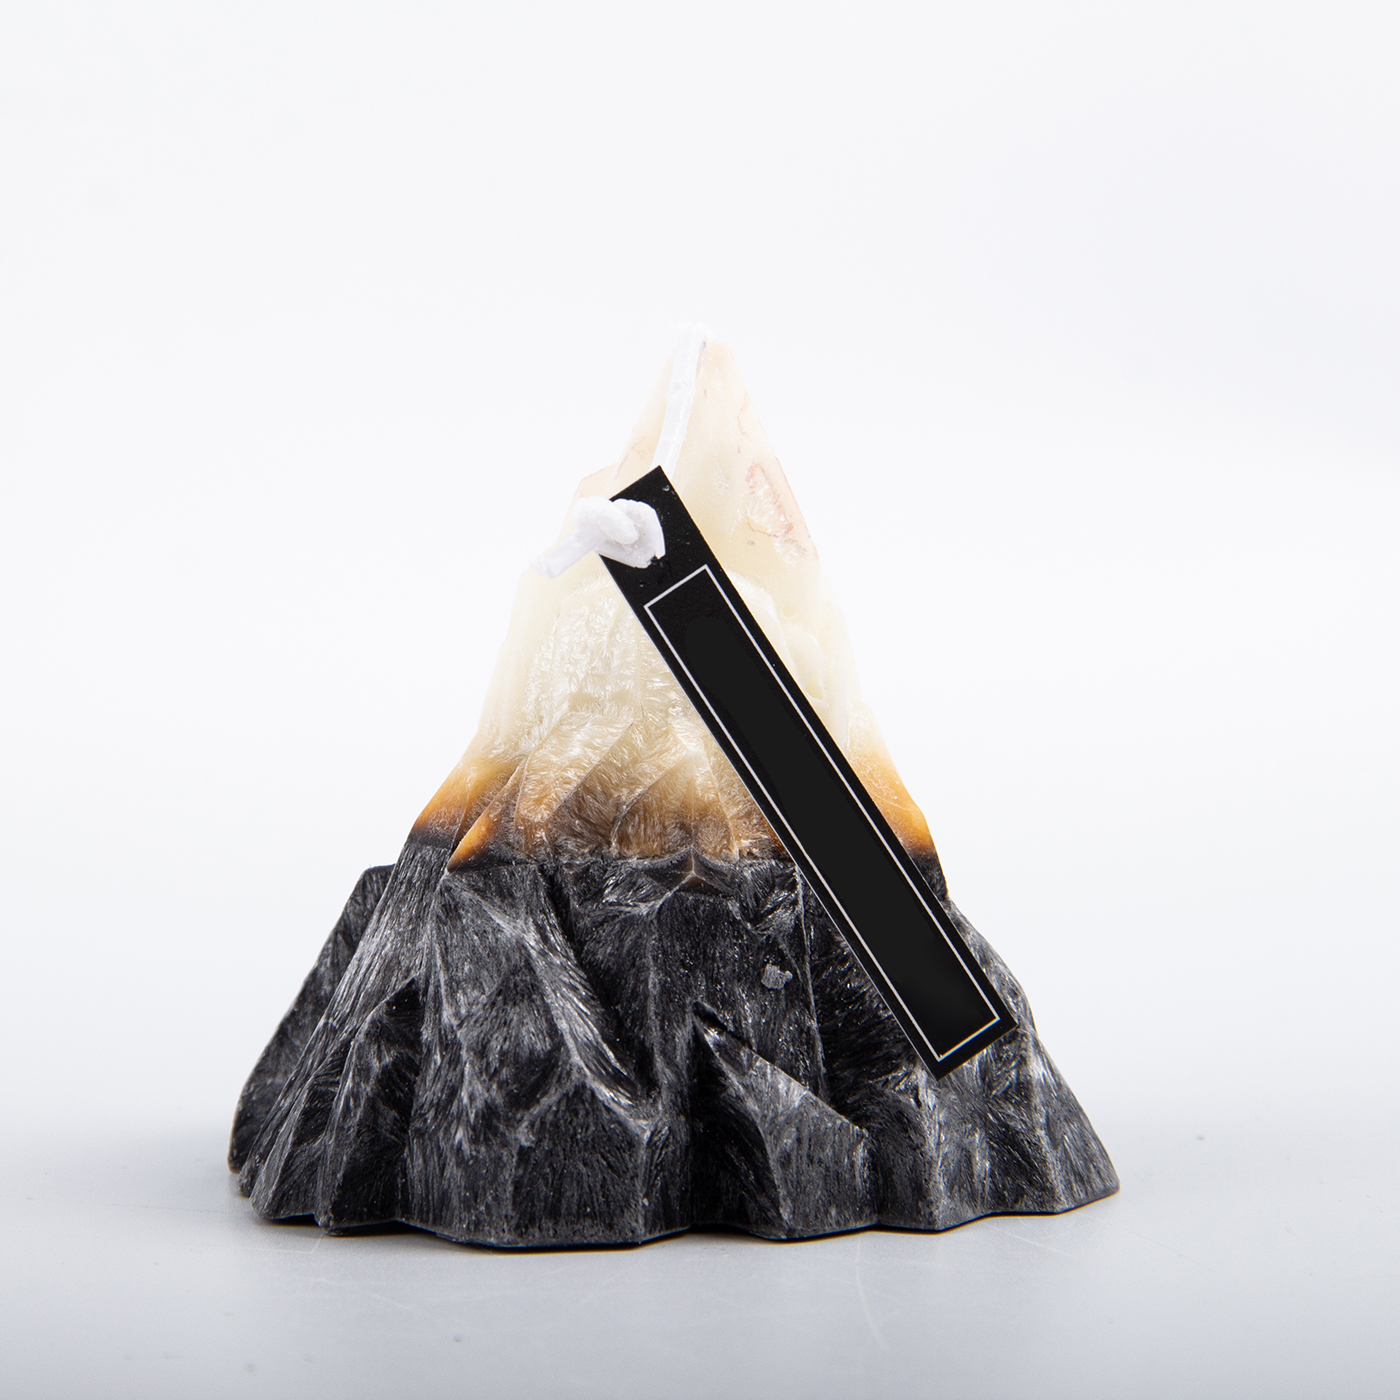 Volcano Shaped Scented Candle3